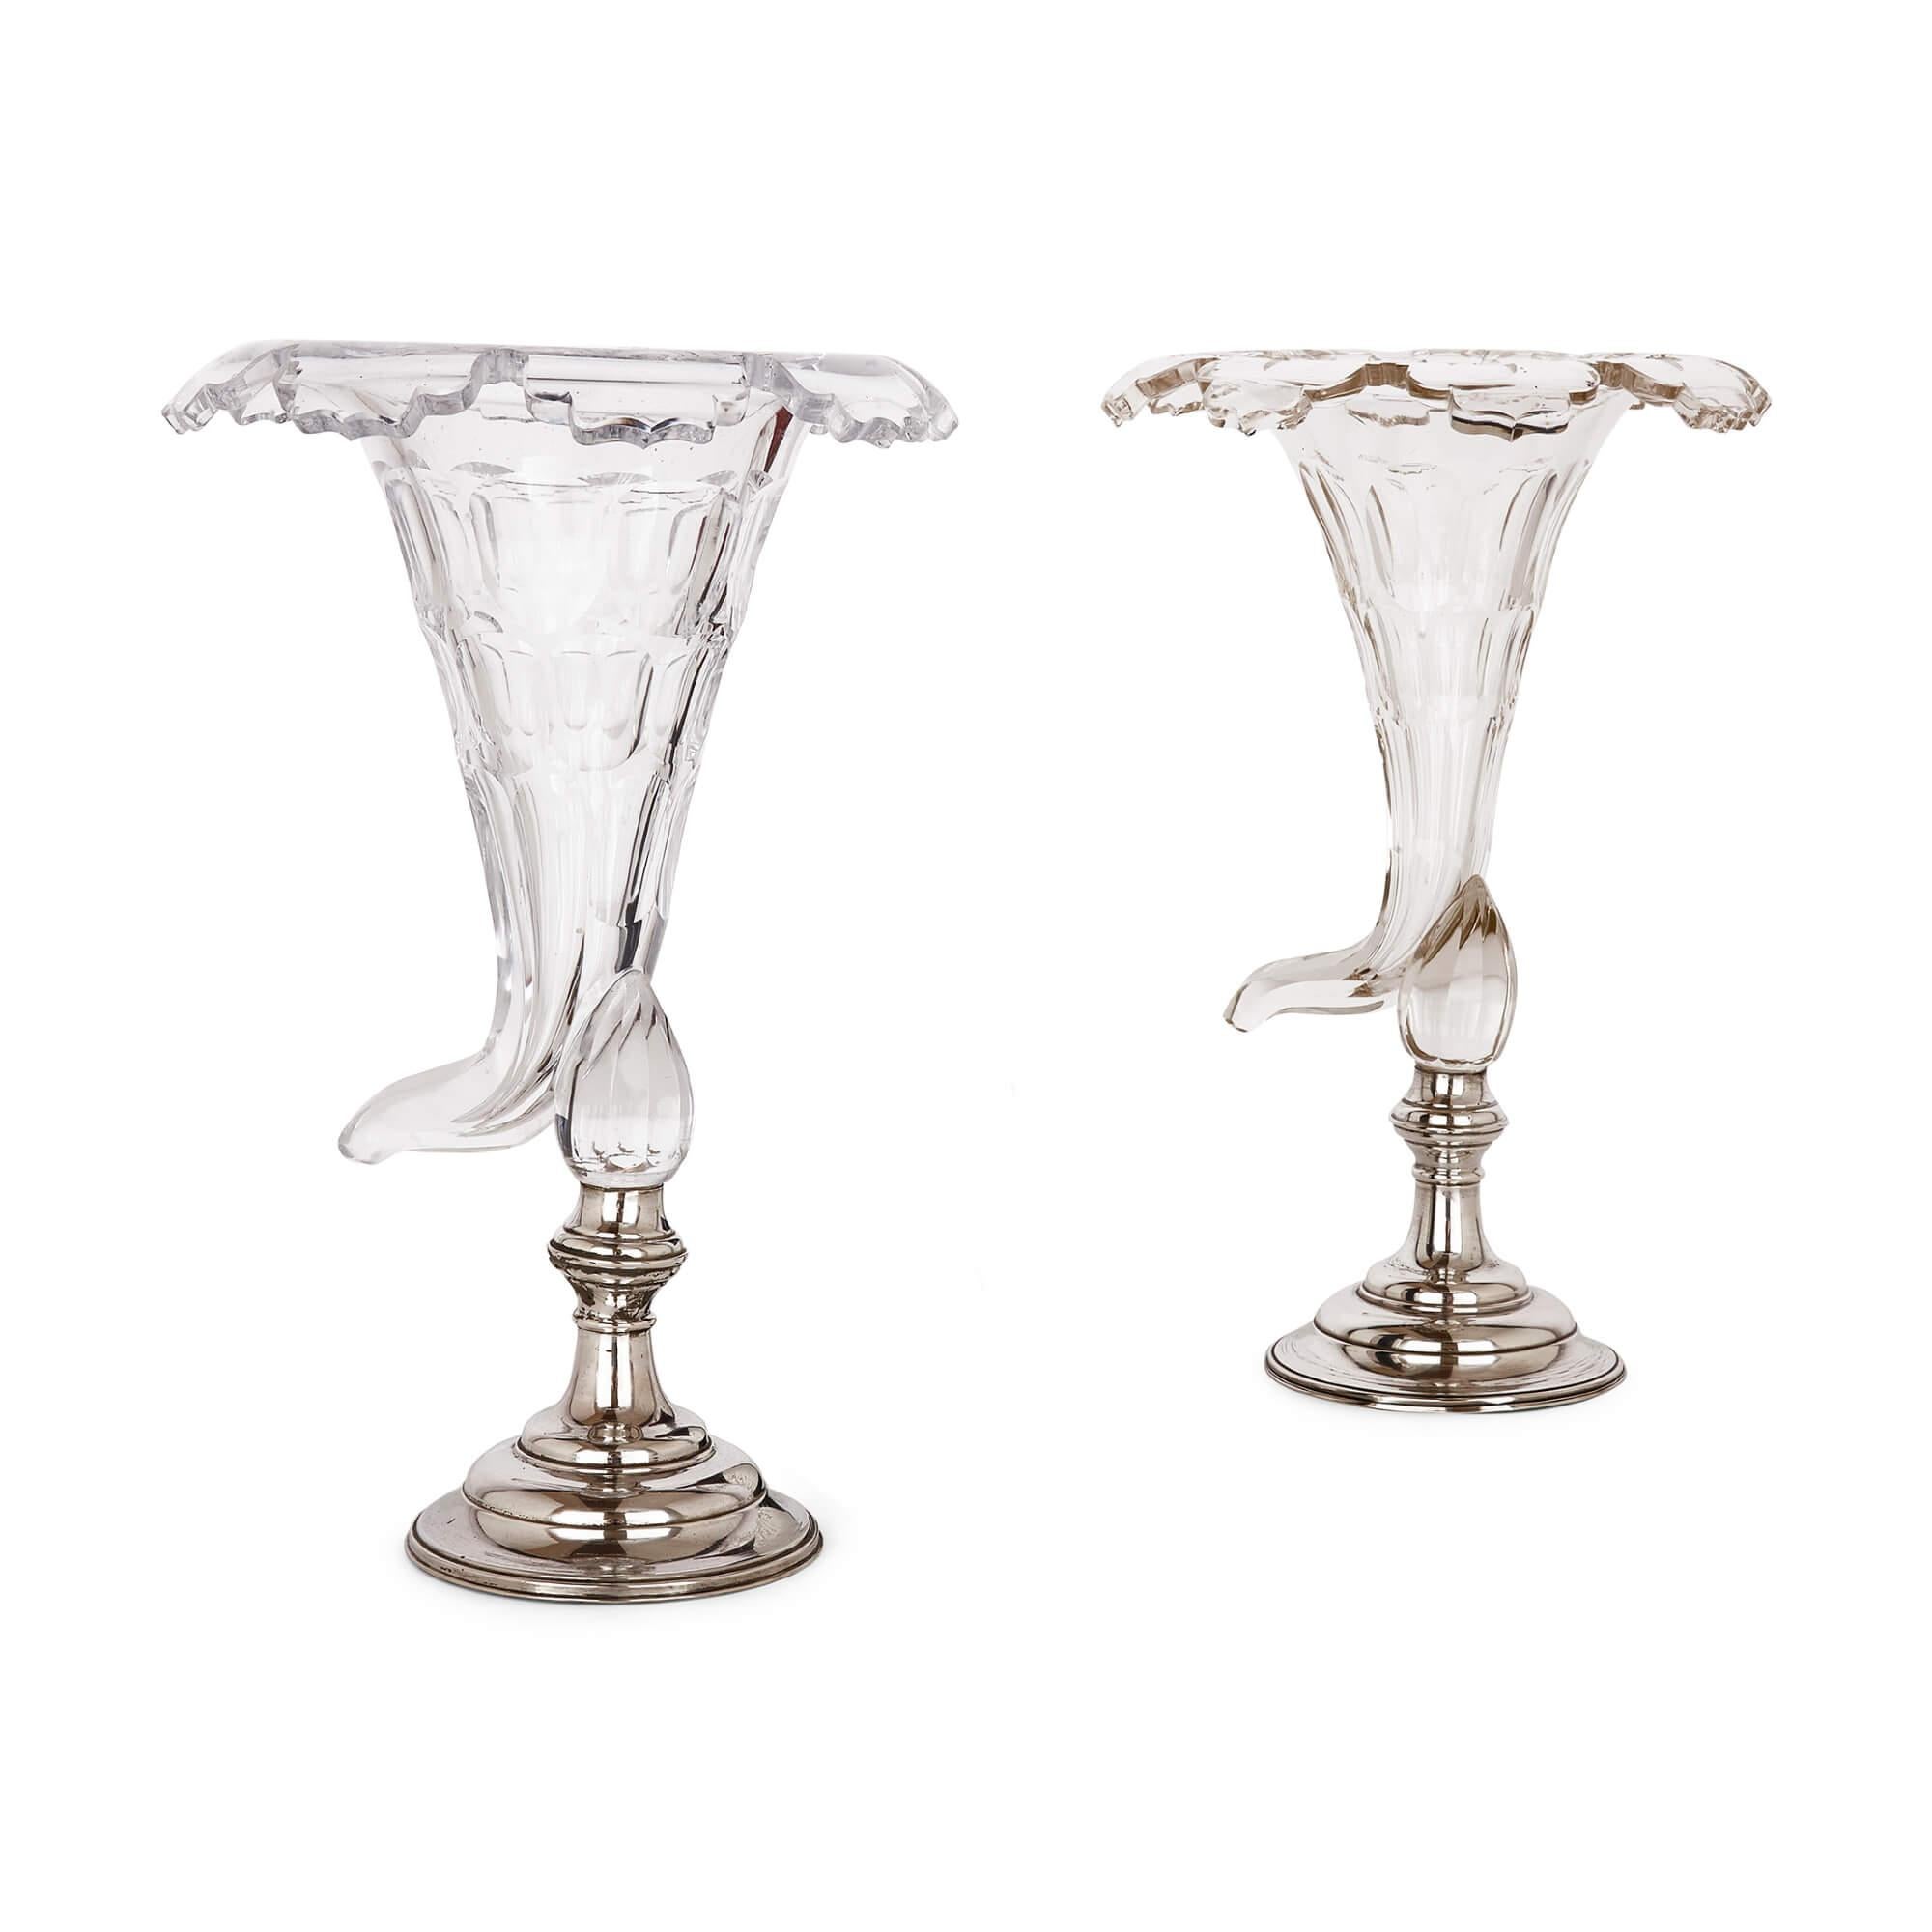 Pair of French glass and silver-plate cornucopia vases
French, Early 20th Century
Height 36cm, diameter 23cm

These excellent vases are crafted from glass and silver-plate and were made in France in the early twentieth century. They consist of a